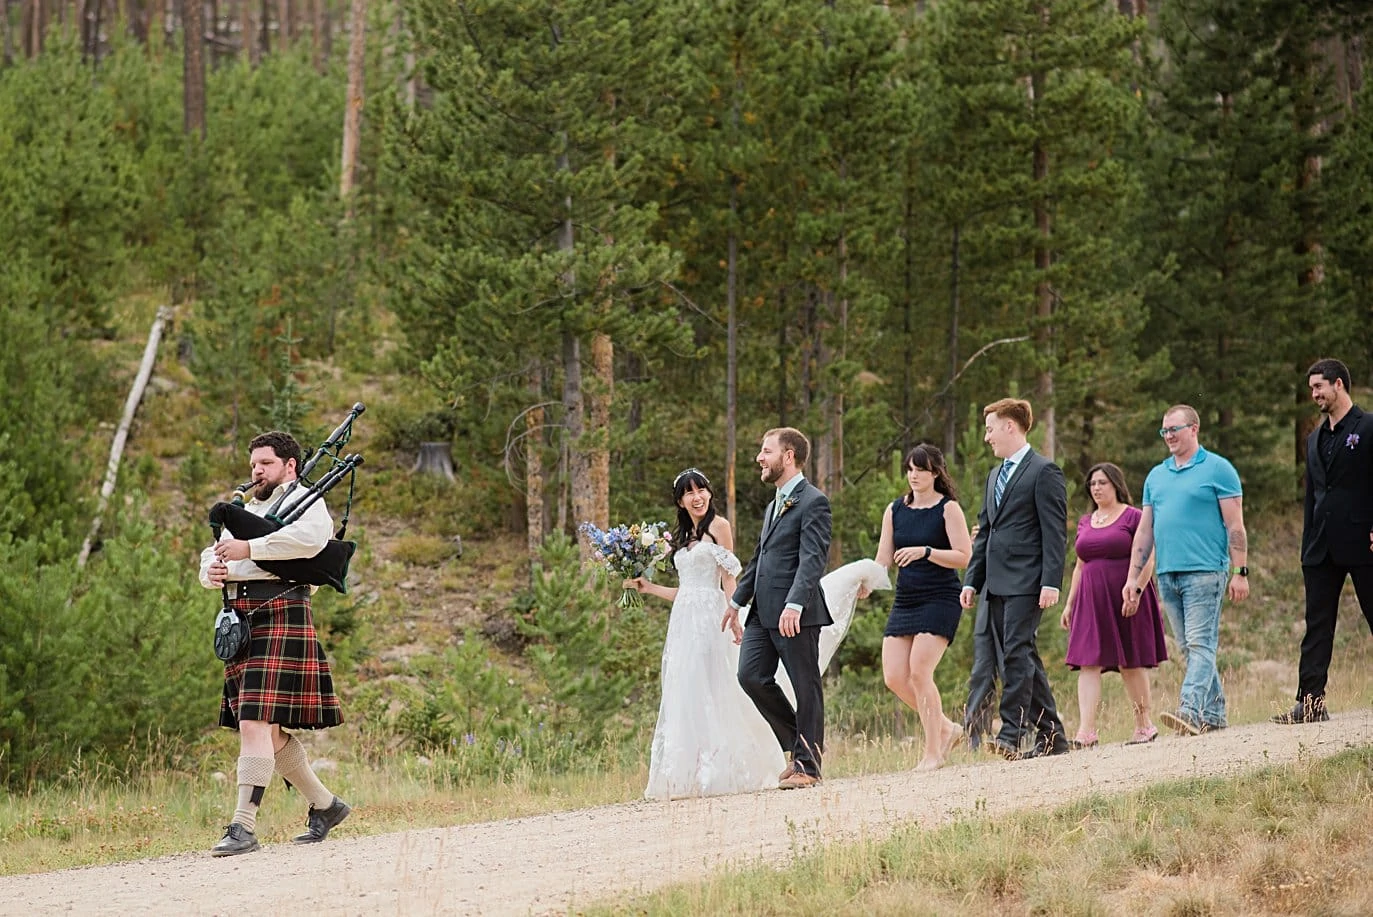 bride and groom walk with friends to wedding ceremony with bagpiper leading the way at intimate Grand Lake wedding by Denver wedding photographer Jennie Crate